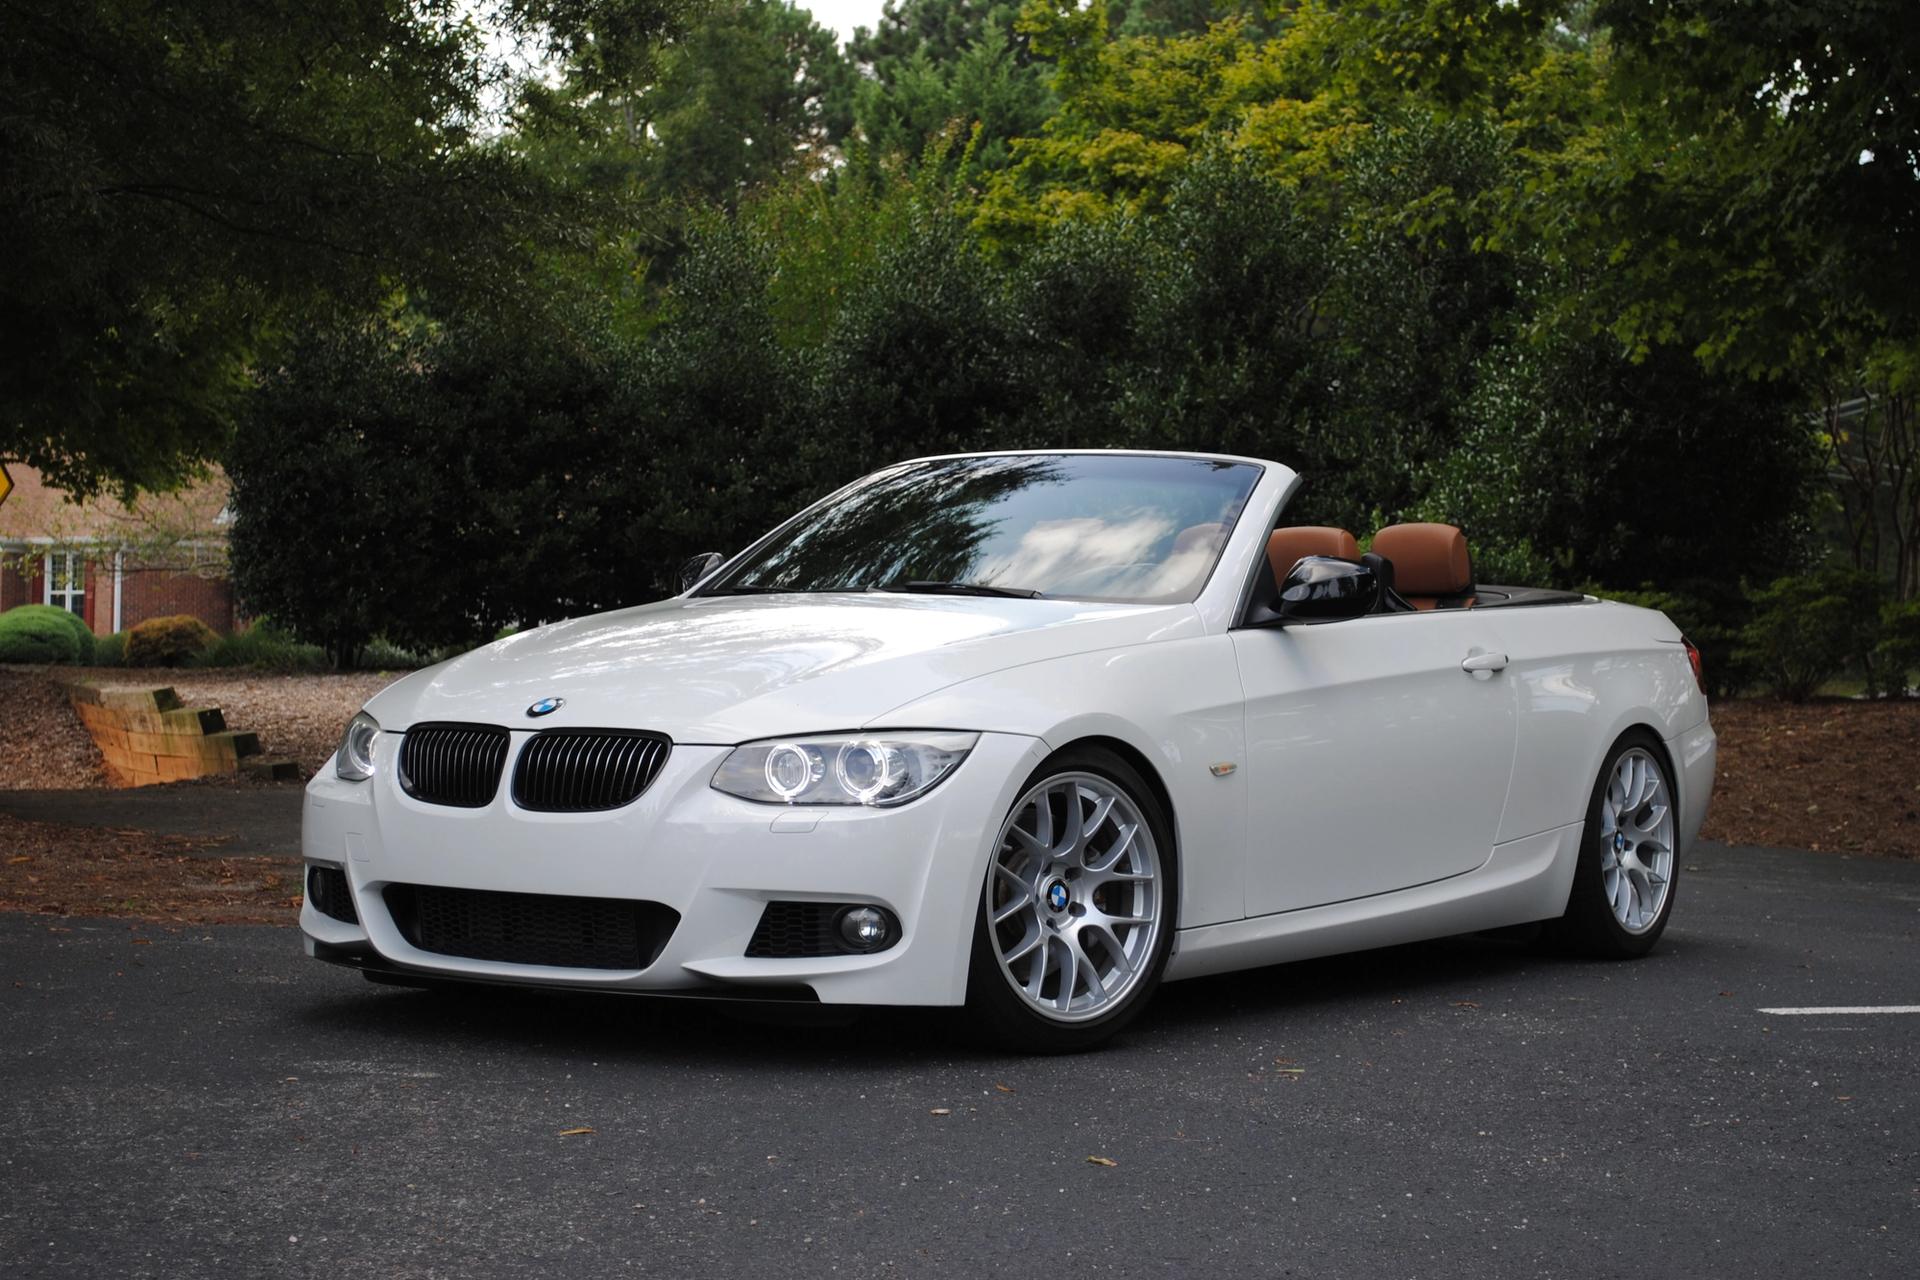 BMW E93 Convertible 3 Series with 18 EC-7 in Race Silver on BMW